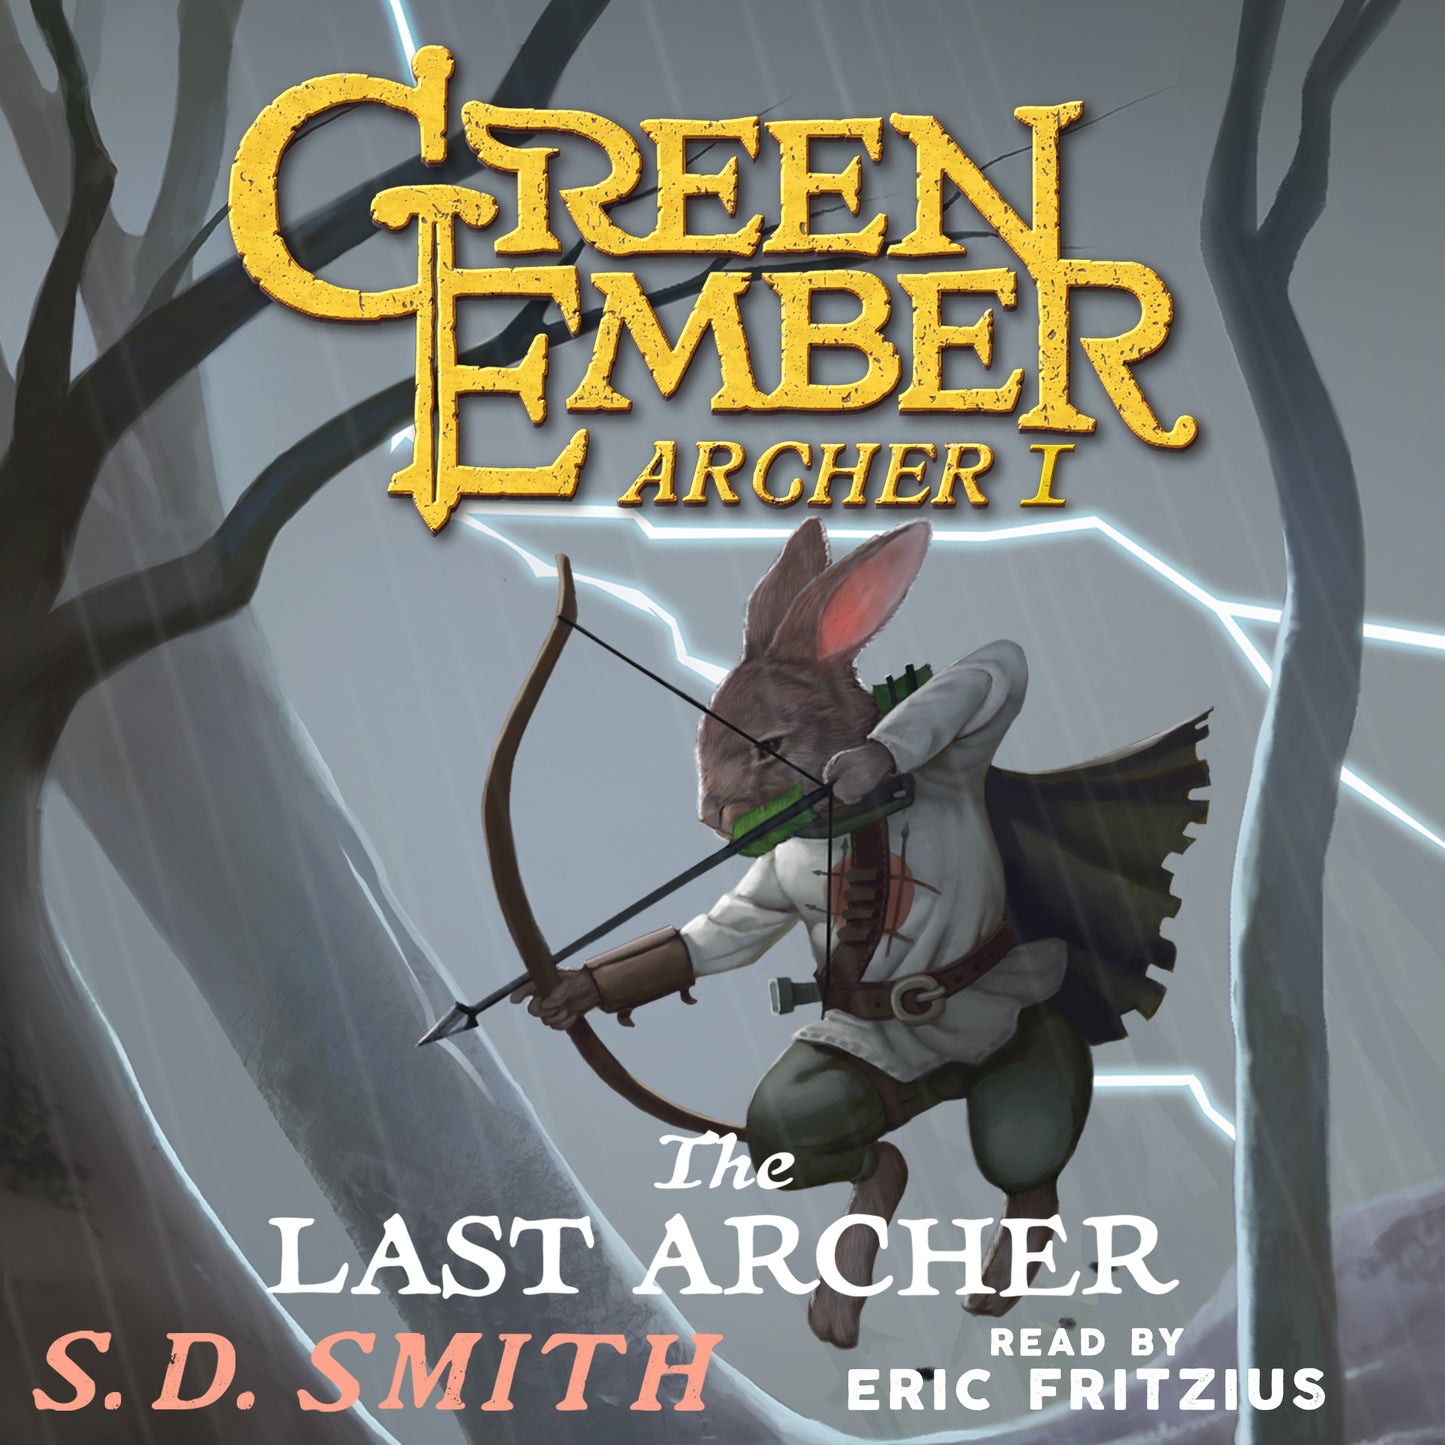 The Last Archer (Green Ember Archer Book I) - Audiobook Download